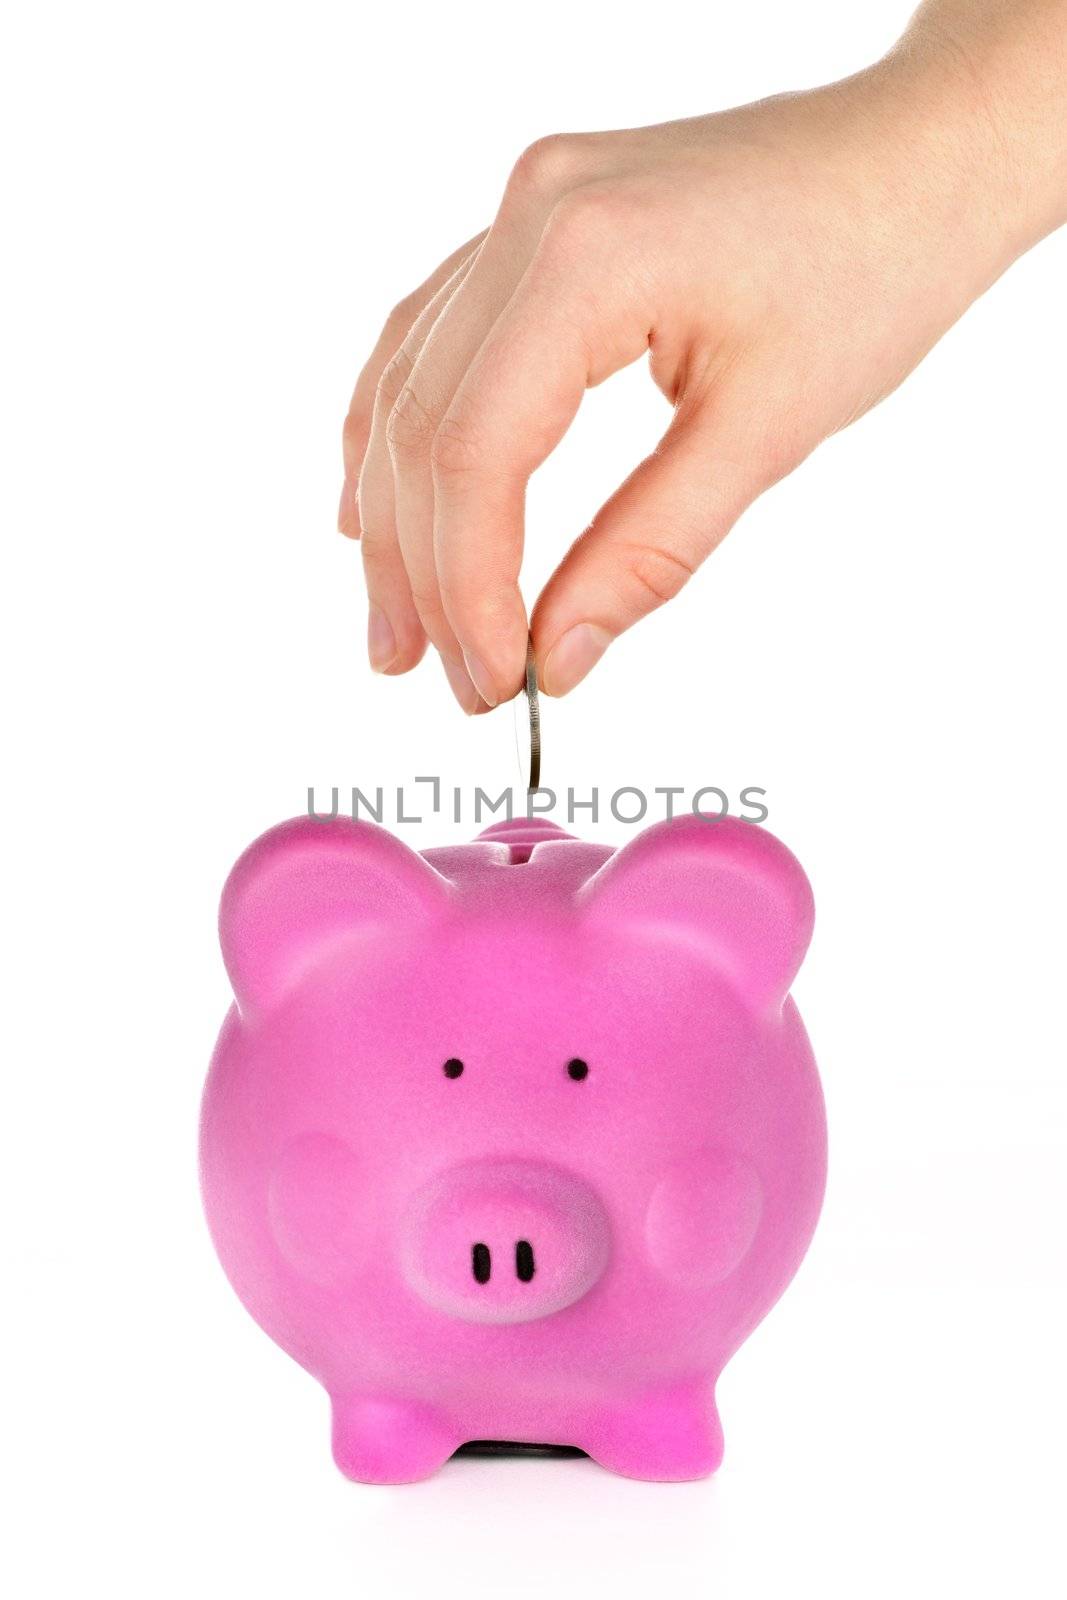 Hand putting coin in piggy bank by elenathewise